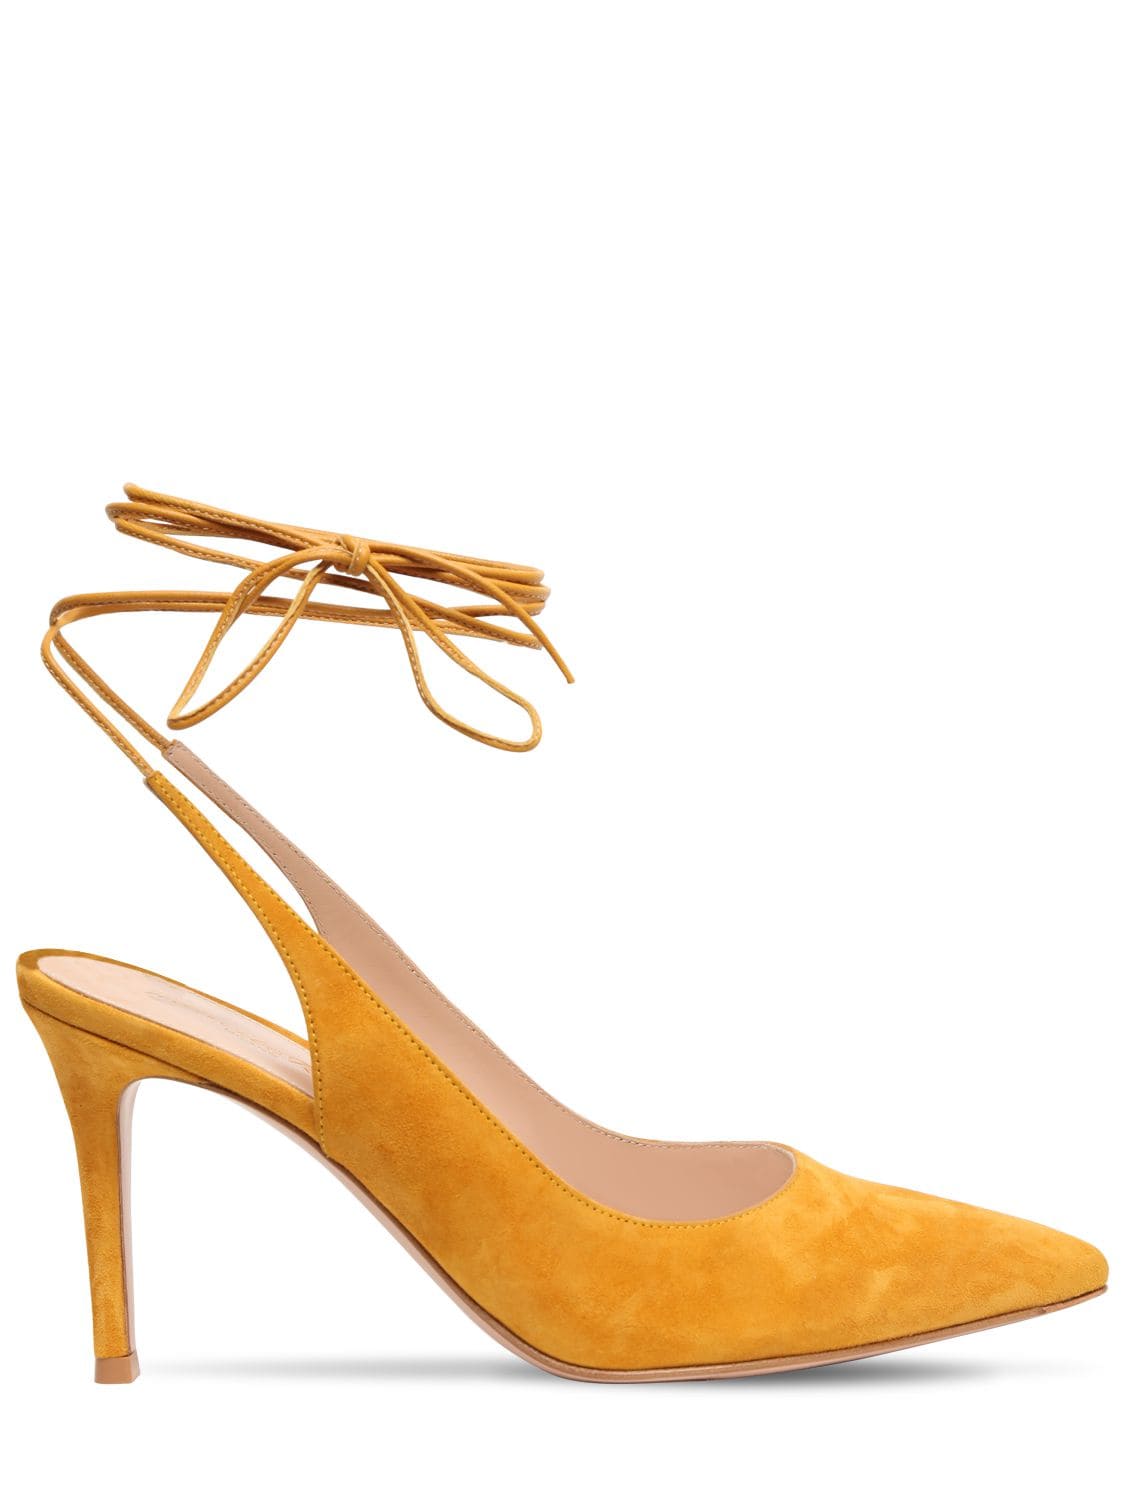 Gianvito Rossi 85mm Suede Lace Up Pumps In Yellow